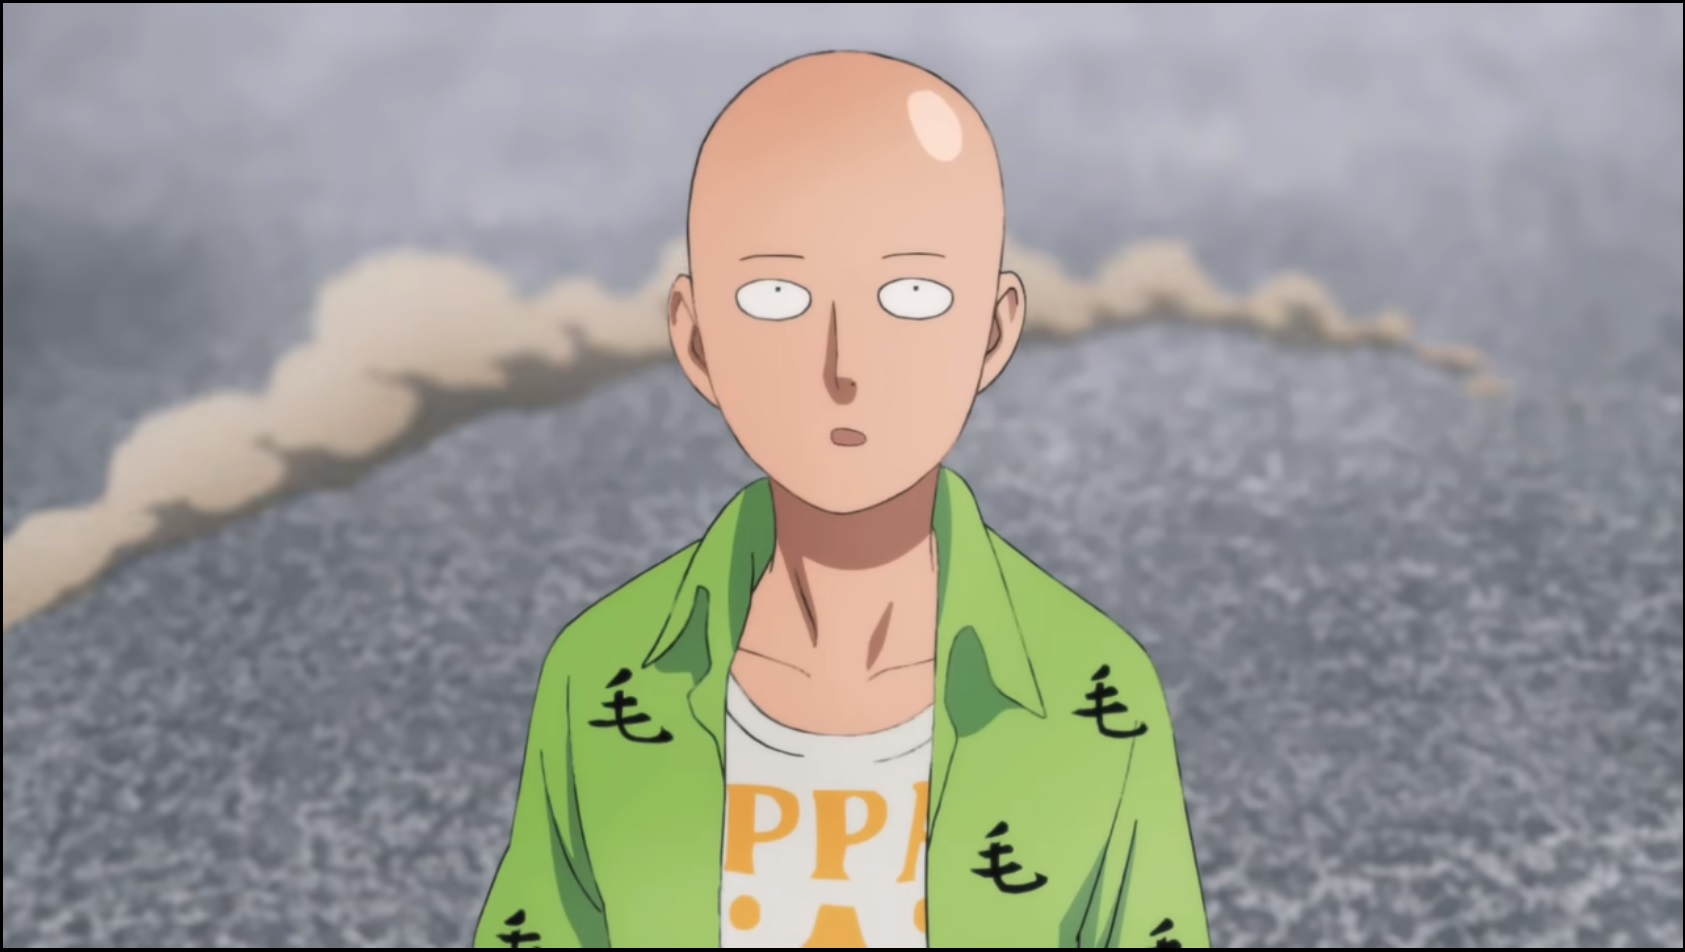 One Punch Man 2 Opening - IntoxiAnime